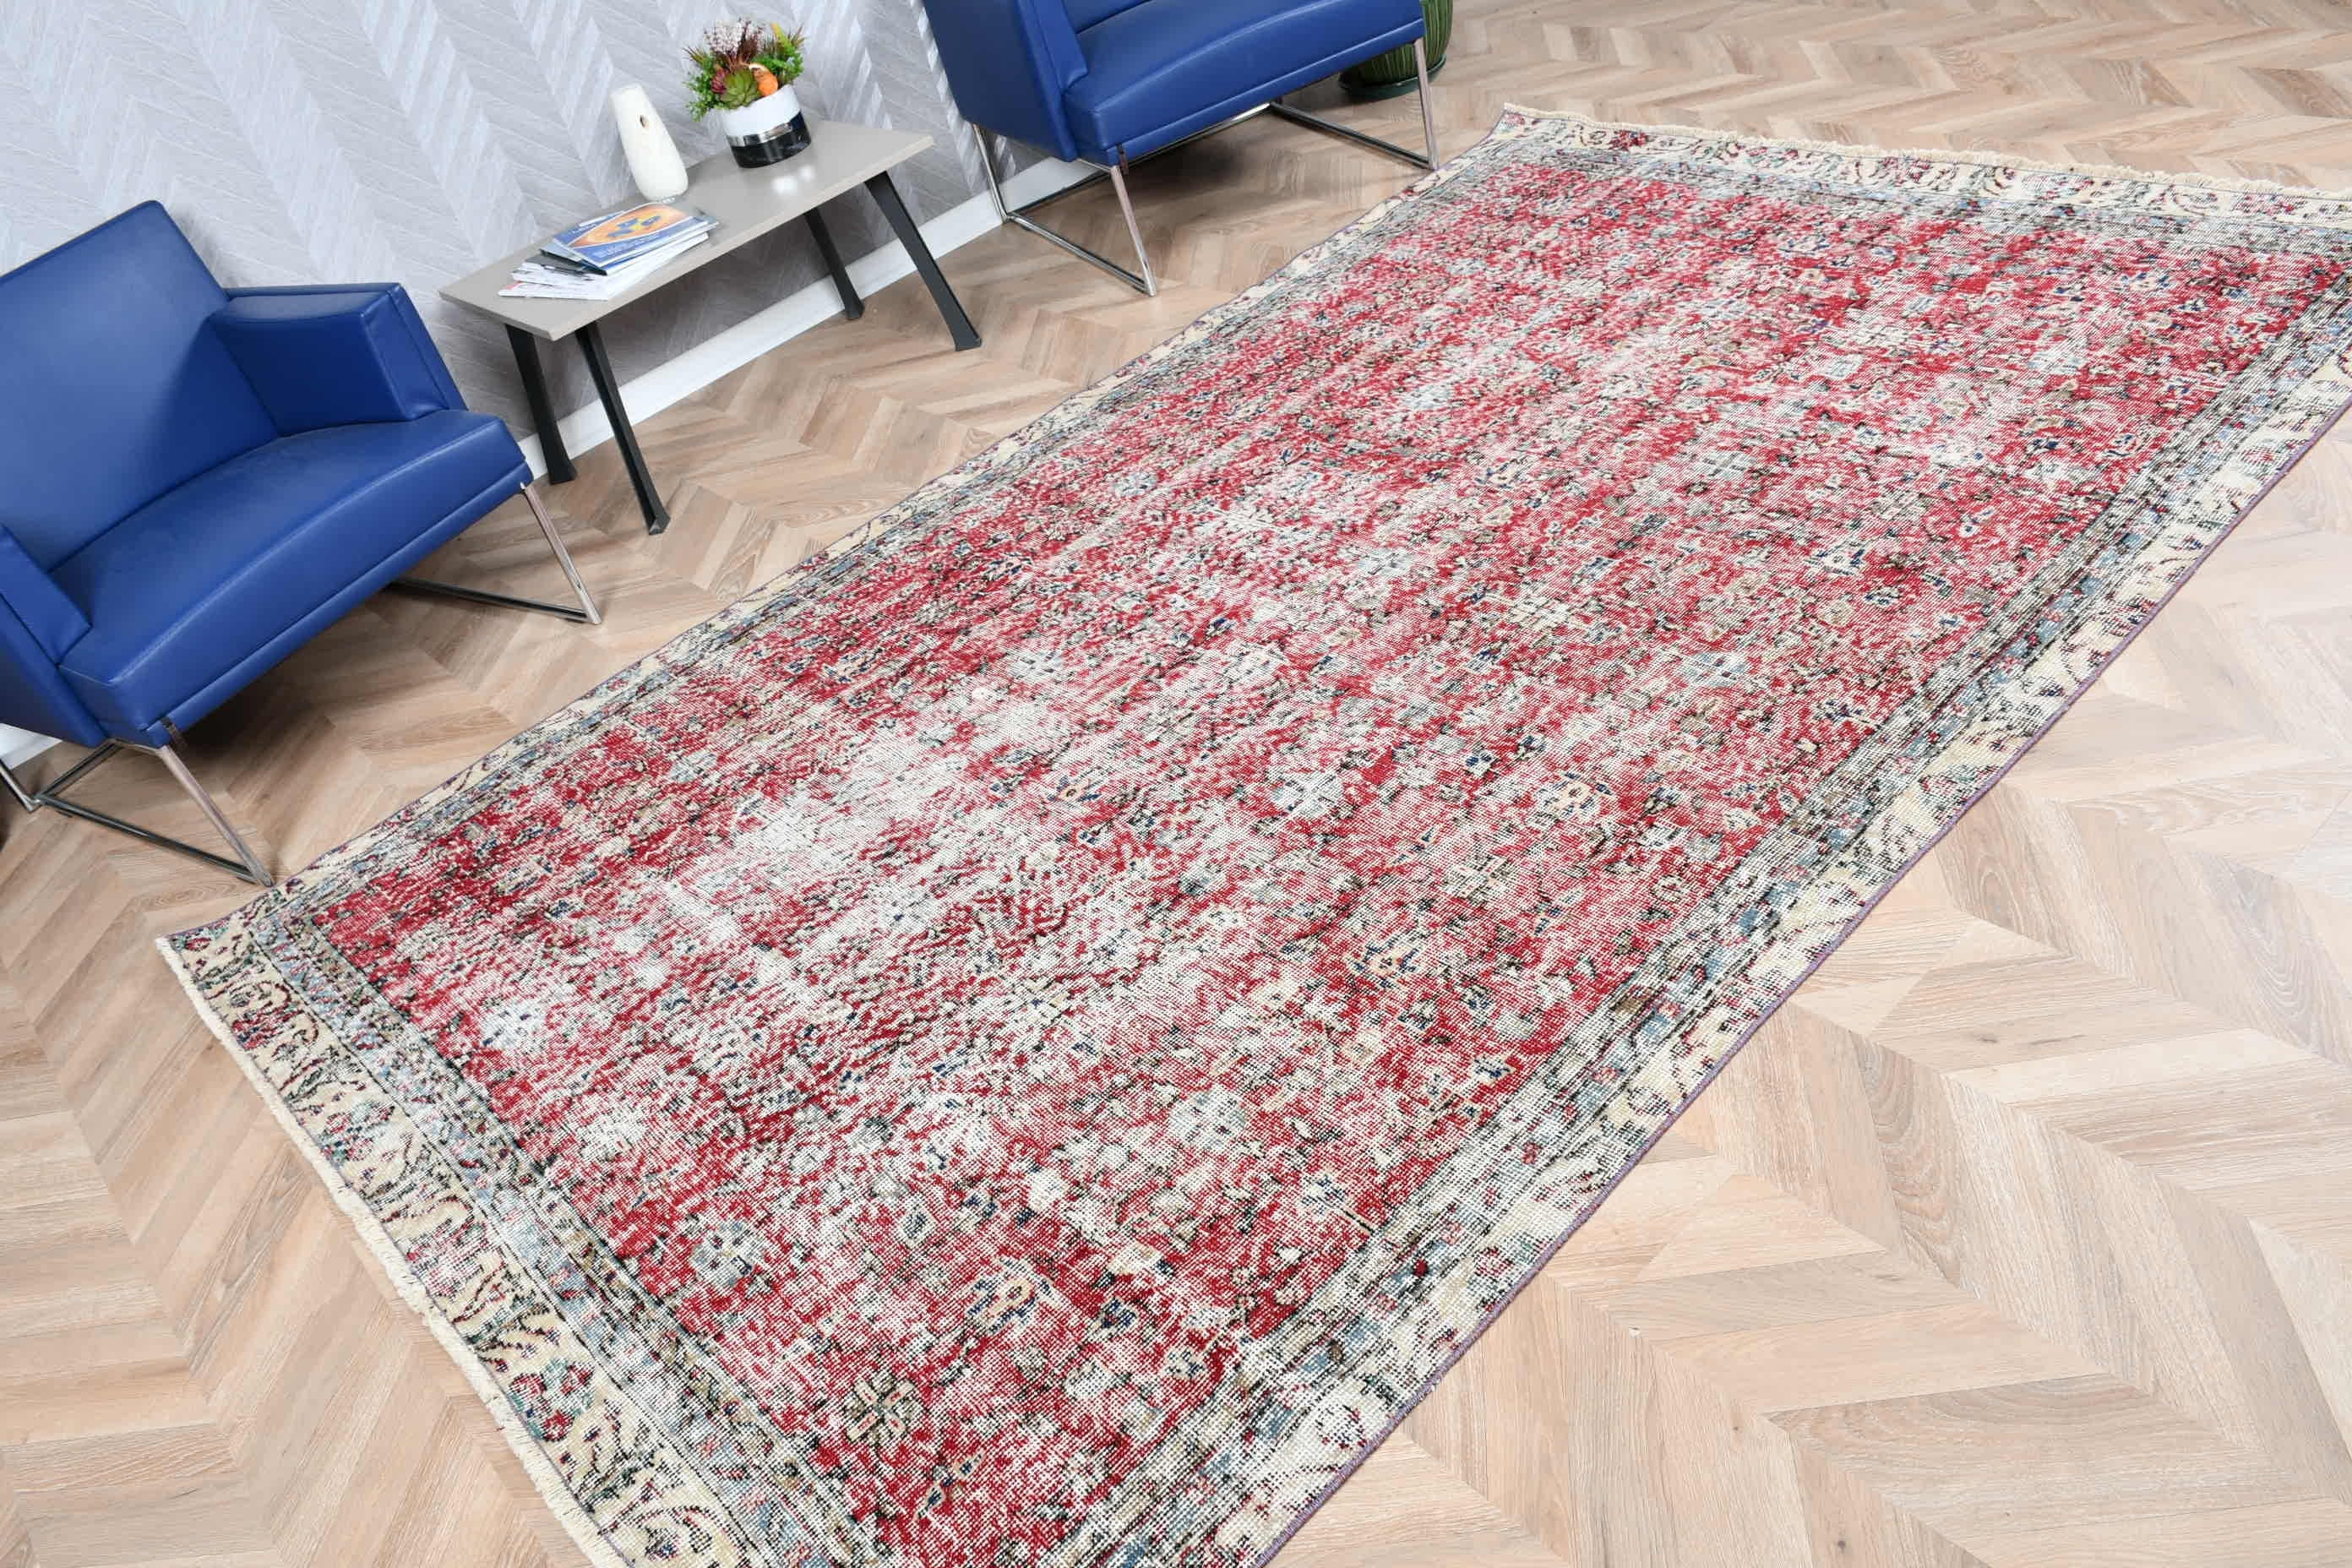 Antique Rugs, Kitchen Rug, Ethnic Rug, 5.9x9.4 ft Large Rugs, Salon Rug, Turkish Rug, Red Anatolian Rugs, Living Room Rugs, Vintage Rugs